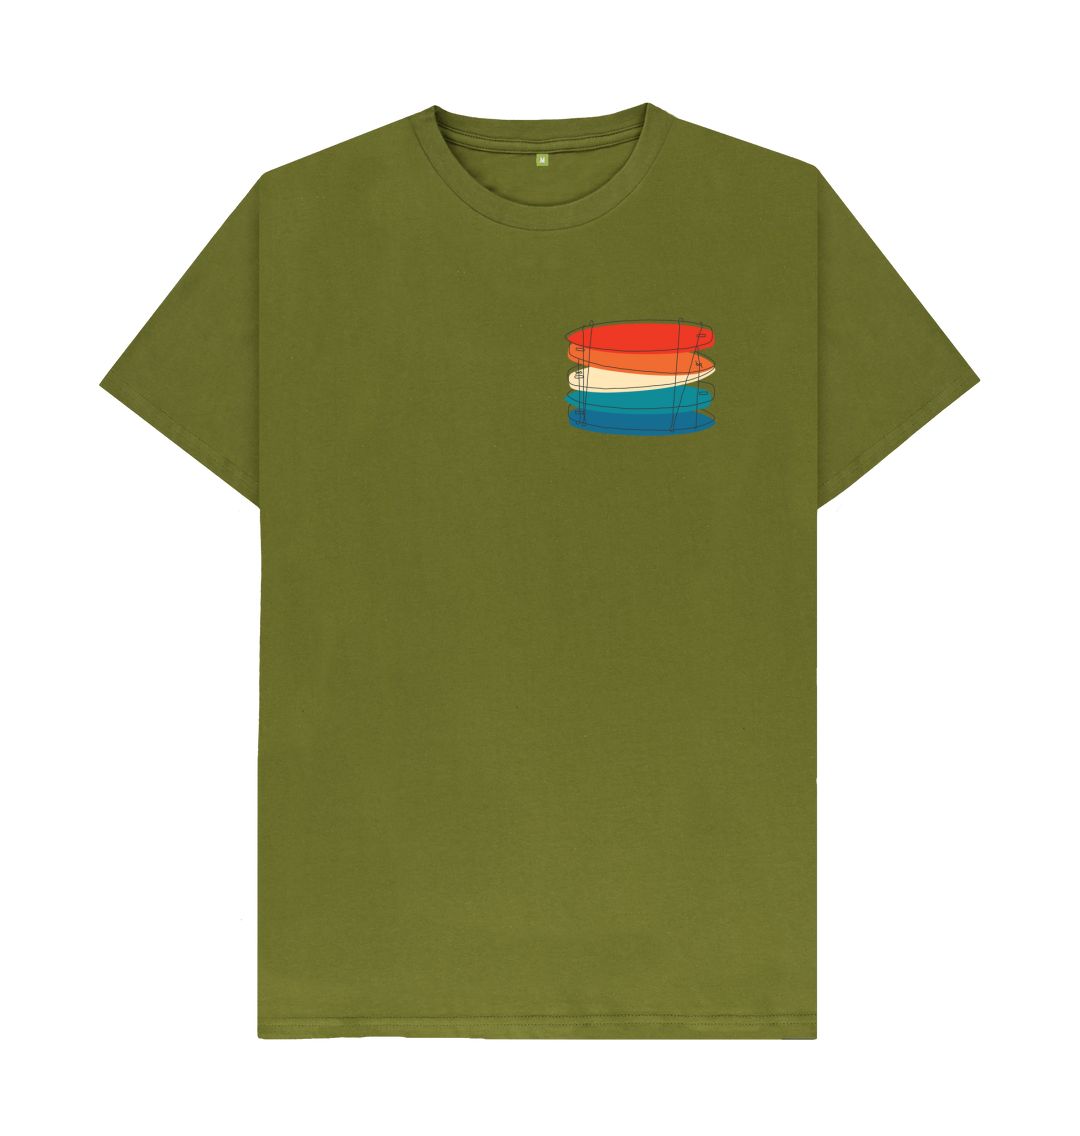 Moss Green 'SIMPLY SURFBOARDS' Mens Tee